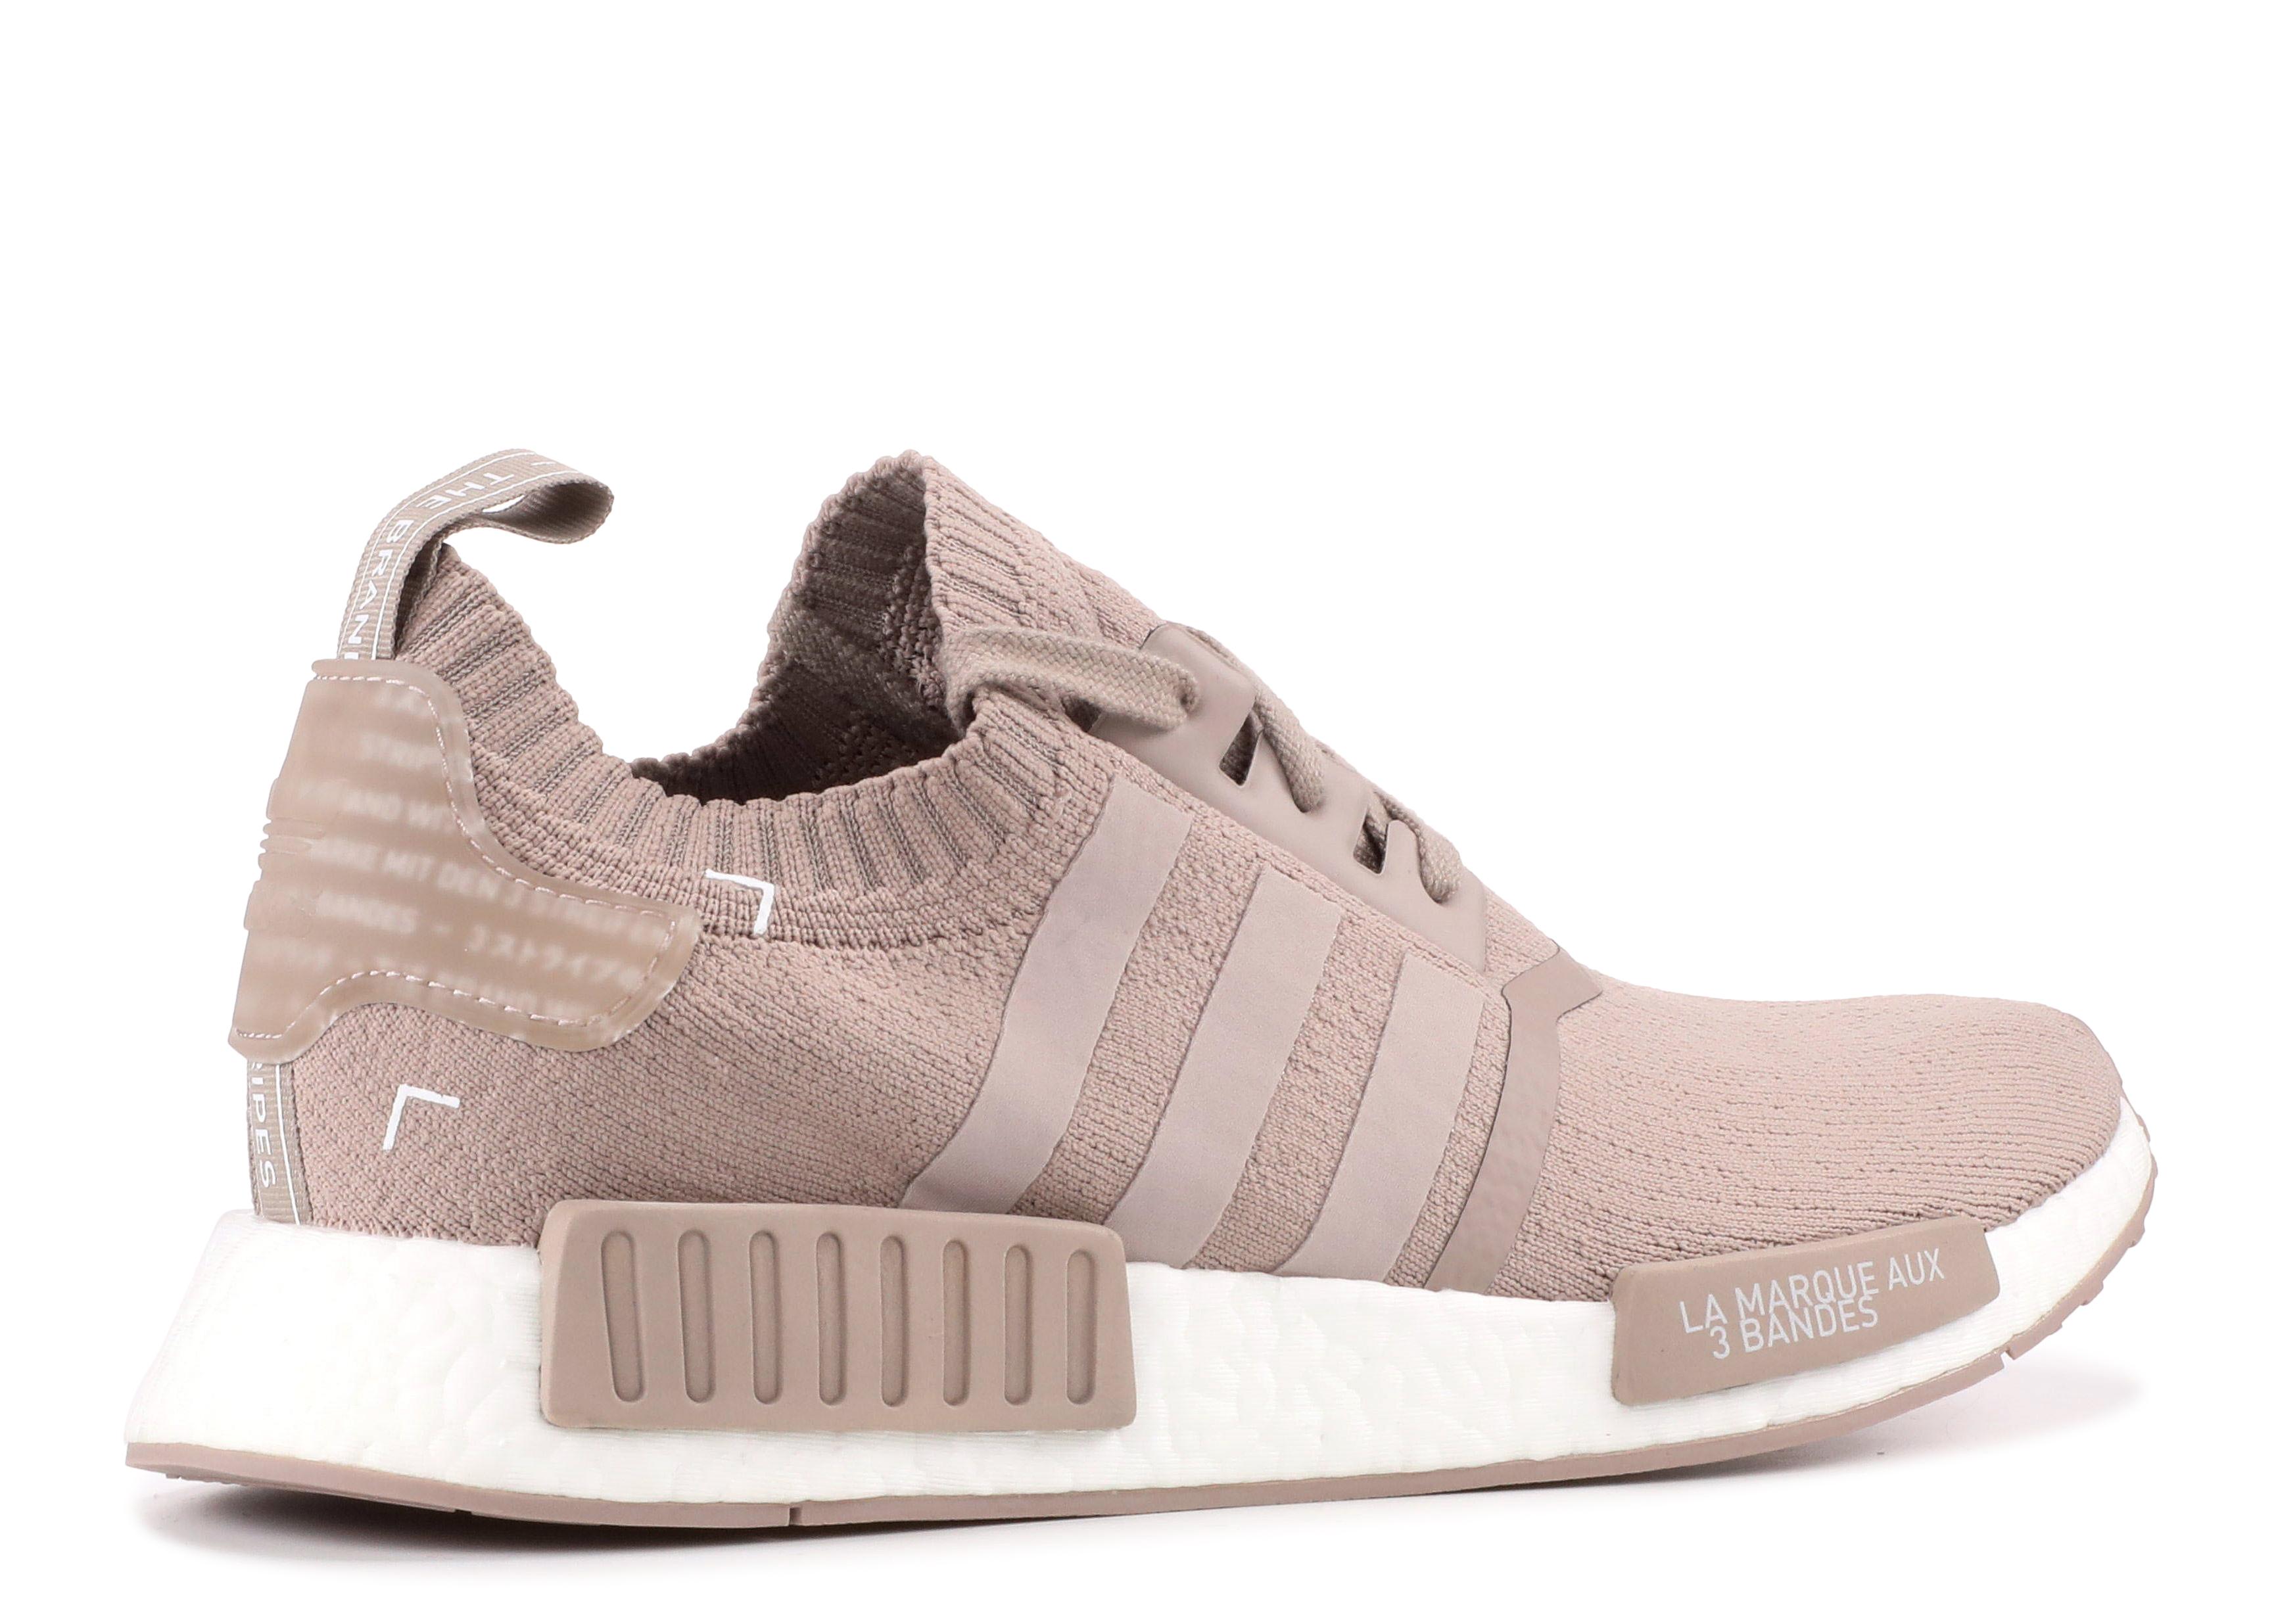 adidas Nmd R1 Pk "french Beige" in Pink for Men - Lyst